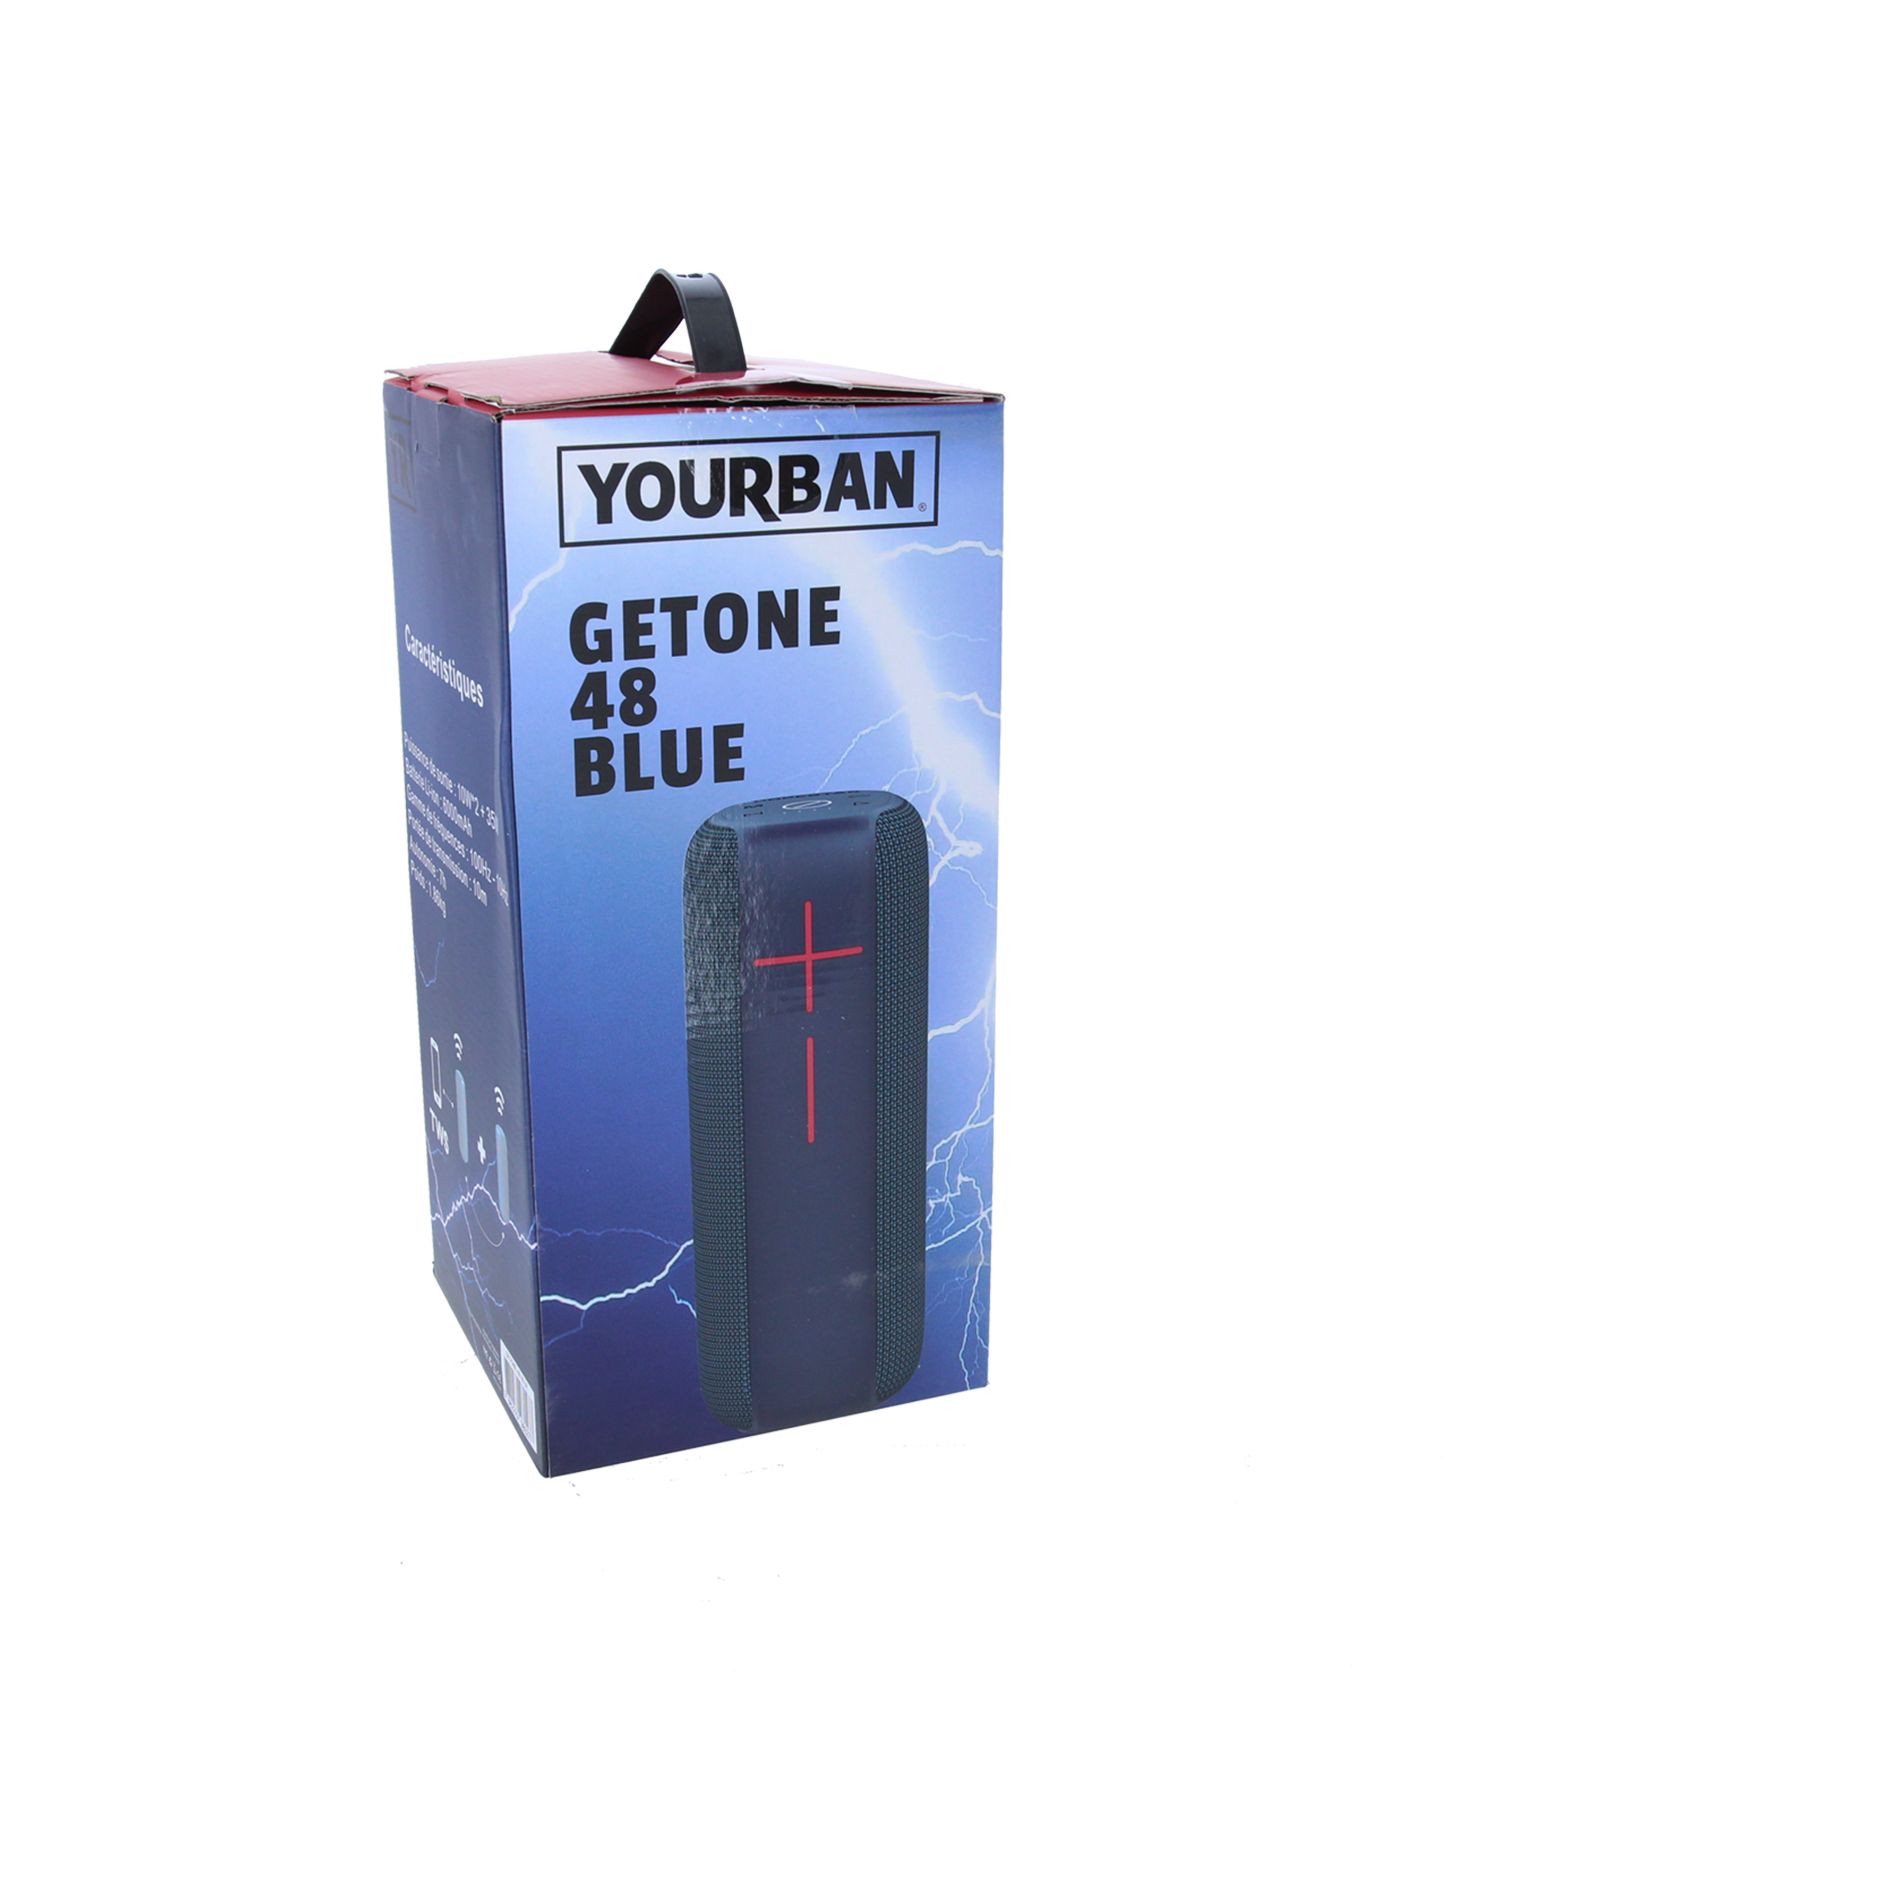 Yourban Getone 48 Blue - Portable PA system - Variation 5